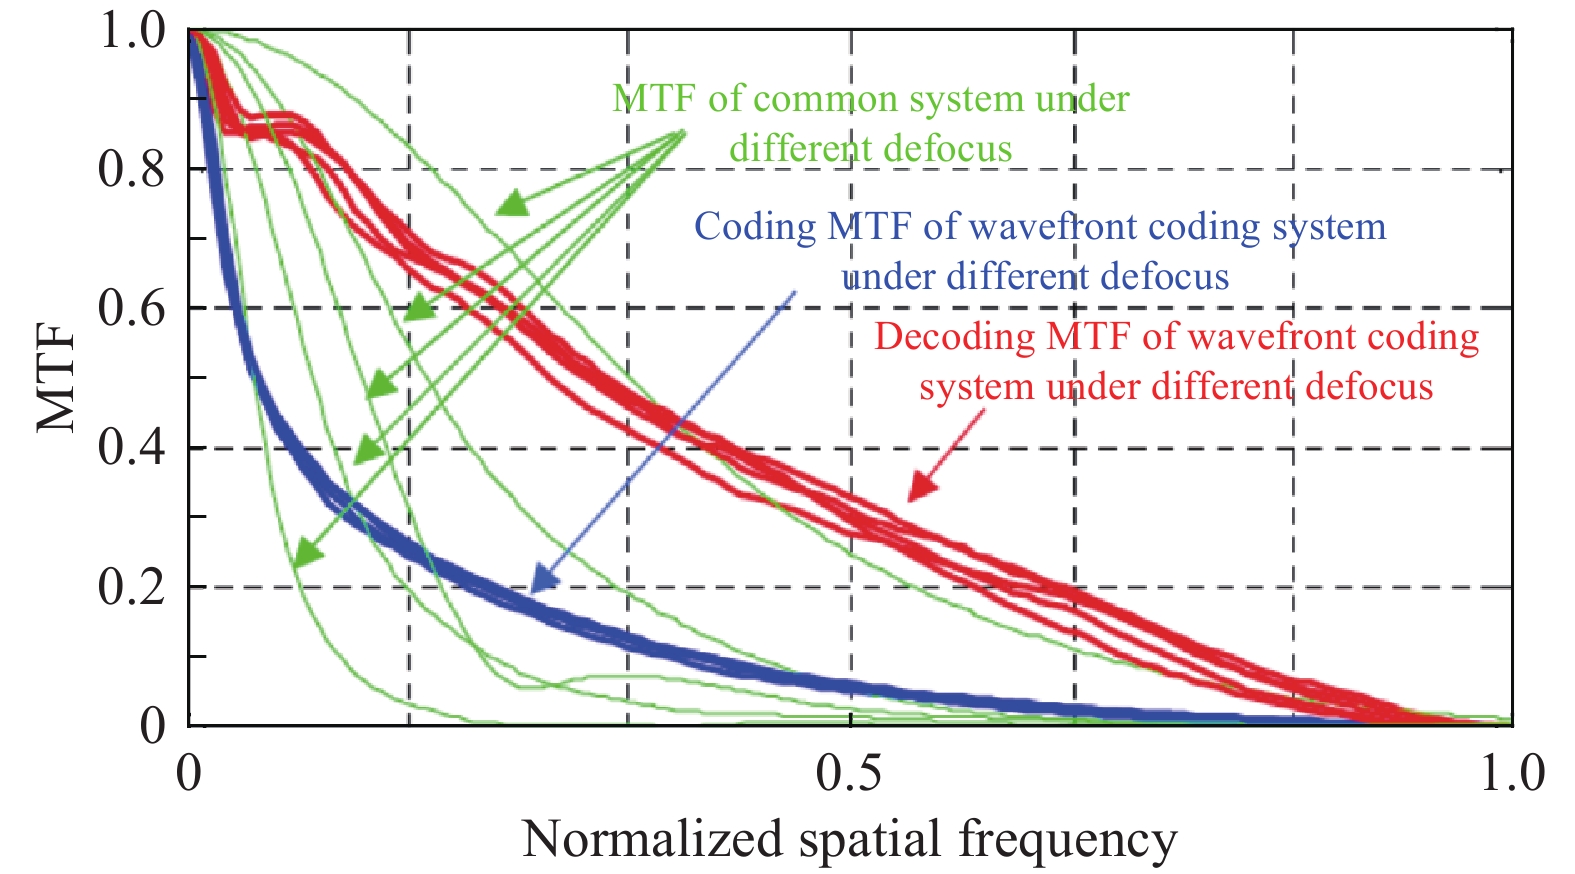 MTF of common system and wavefront coding system